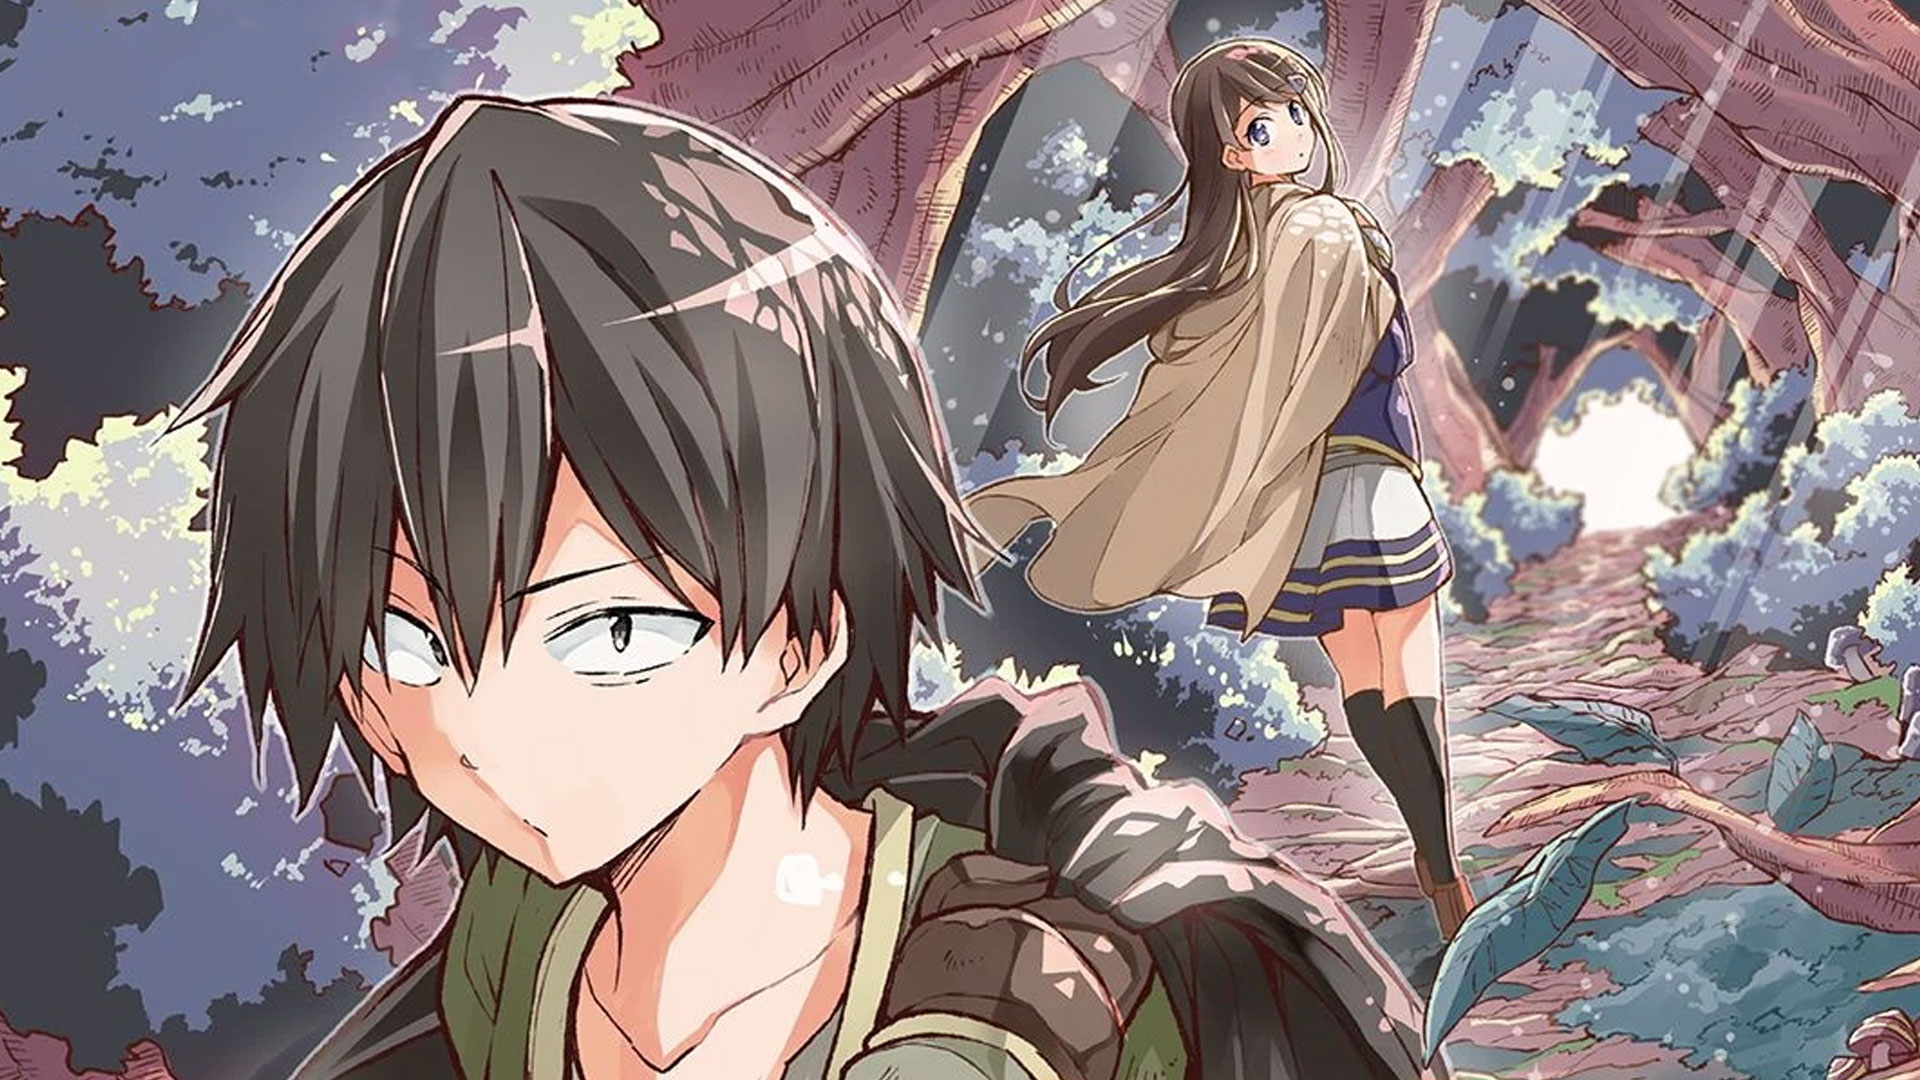 What Can We Expect From the Recently Announced Loner Life in Another World Anime Adaptation?